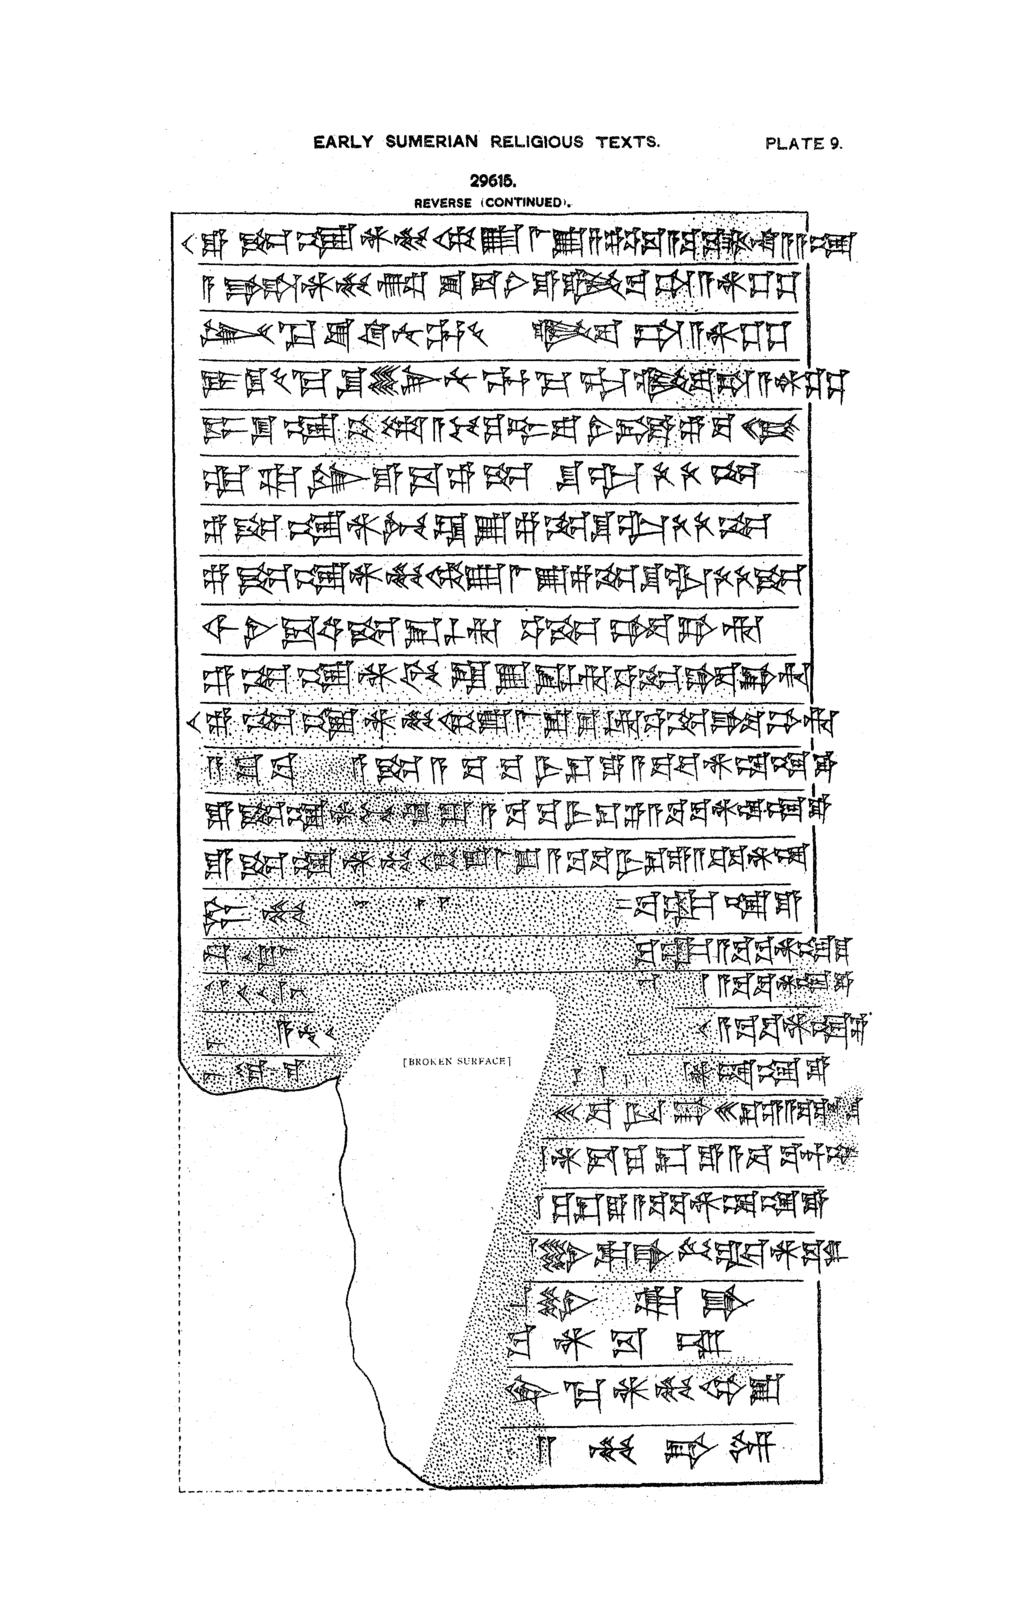 EARLY SUMERIAN RELIGIOUS TEXTS. PLATE 9.